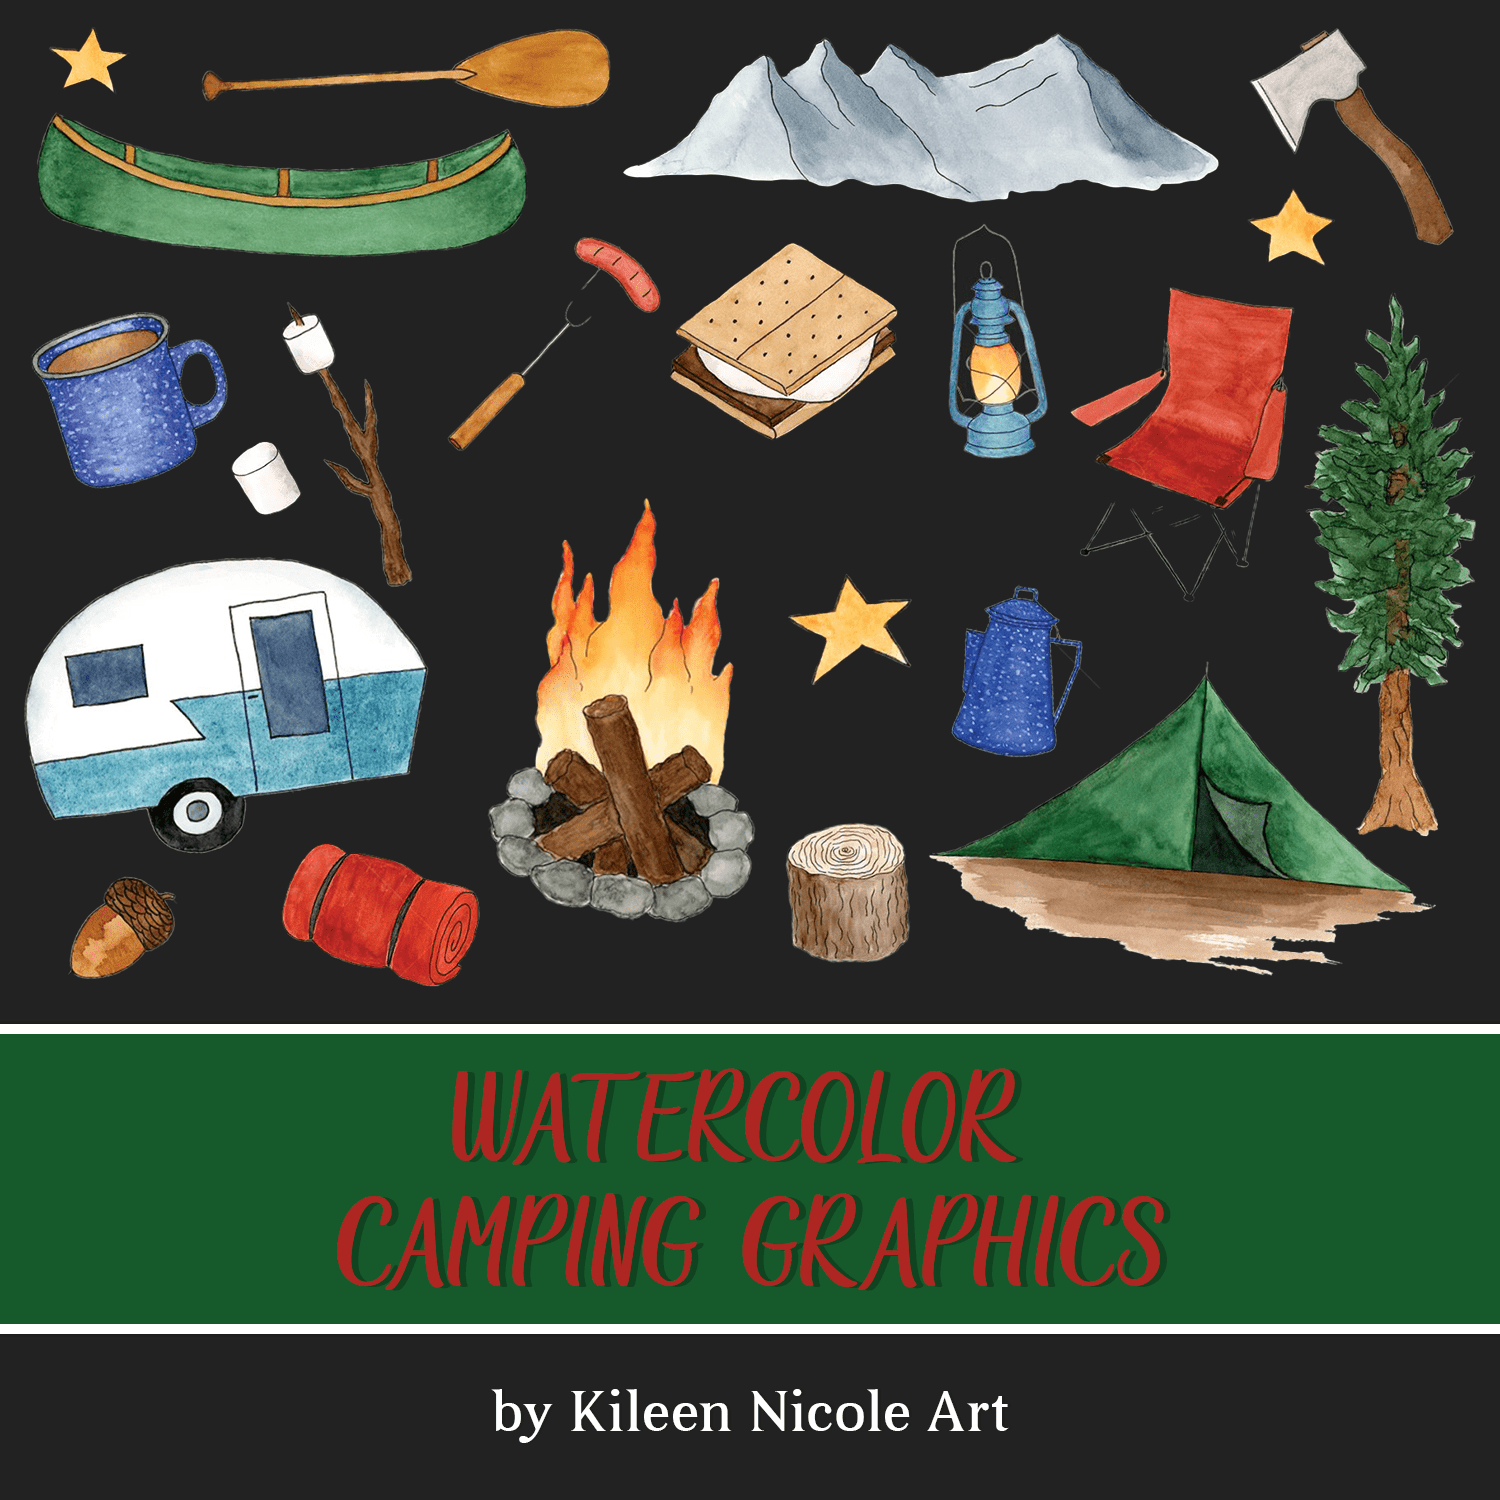 Watercolor Camping Graphics created by Kileen Nicole Art.